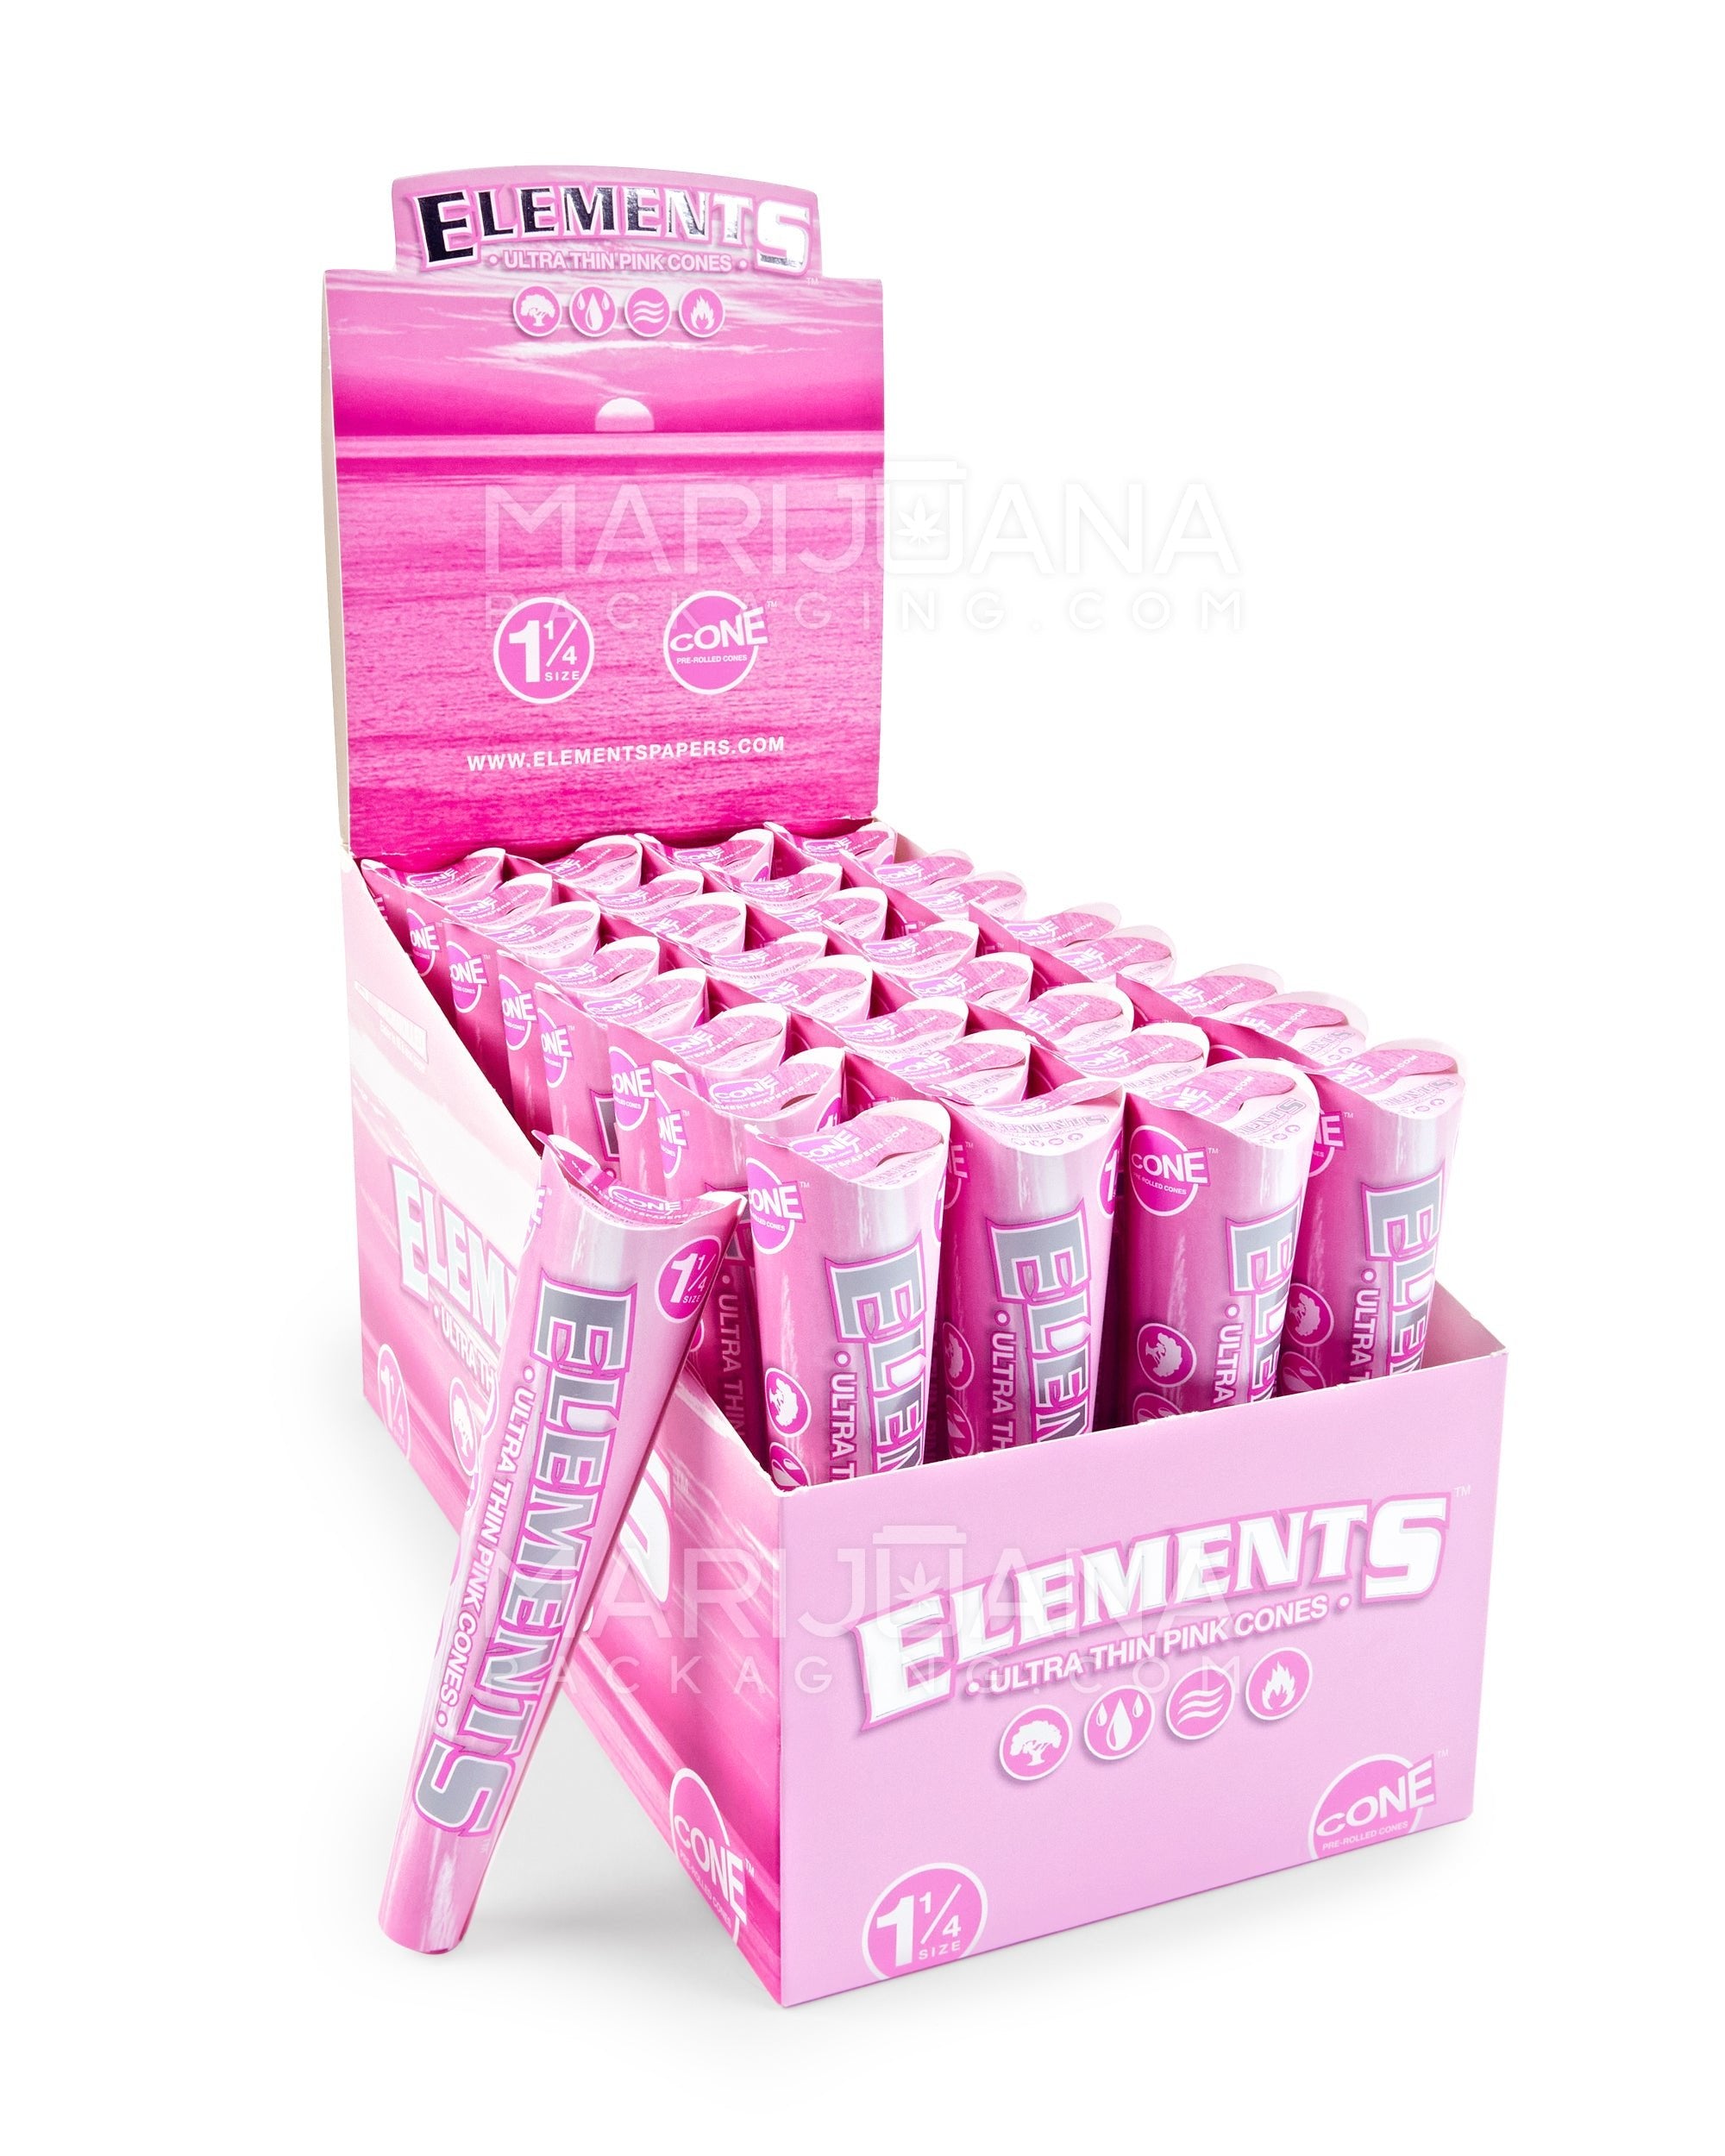 ELEMENTS | 'Retail Display' 1 1/4 Size Ultra Thin Pre-Rolled Cones | 84mm - Pink Rice Paper - 32 Count - 1